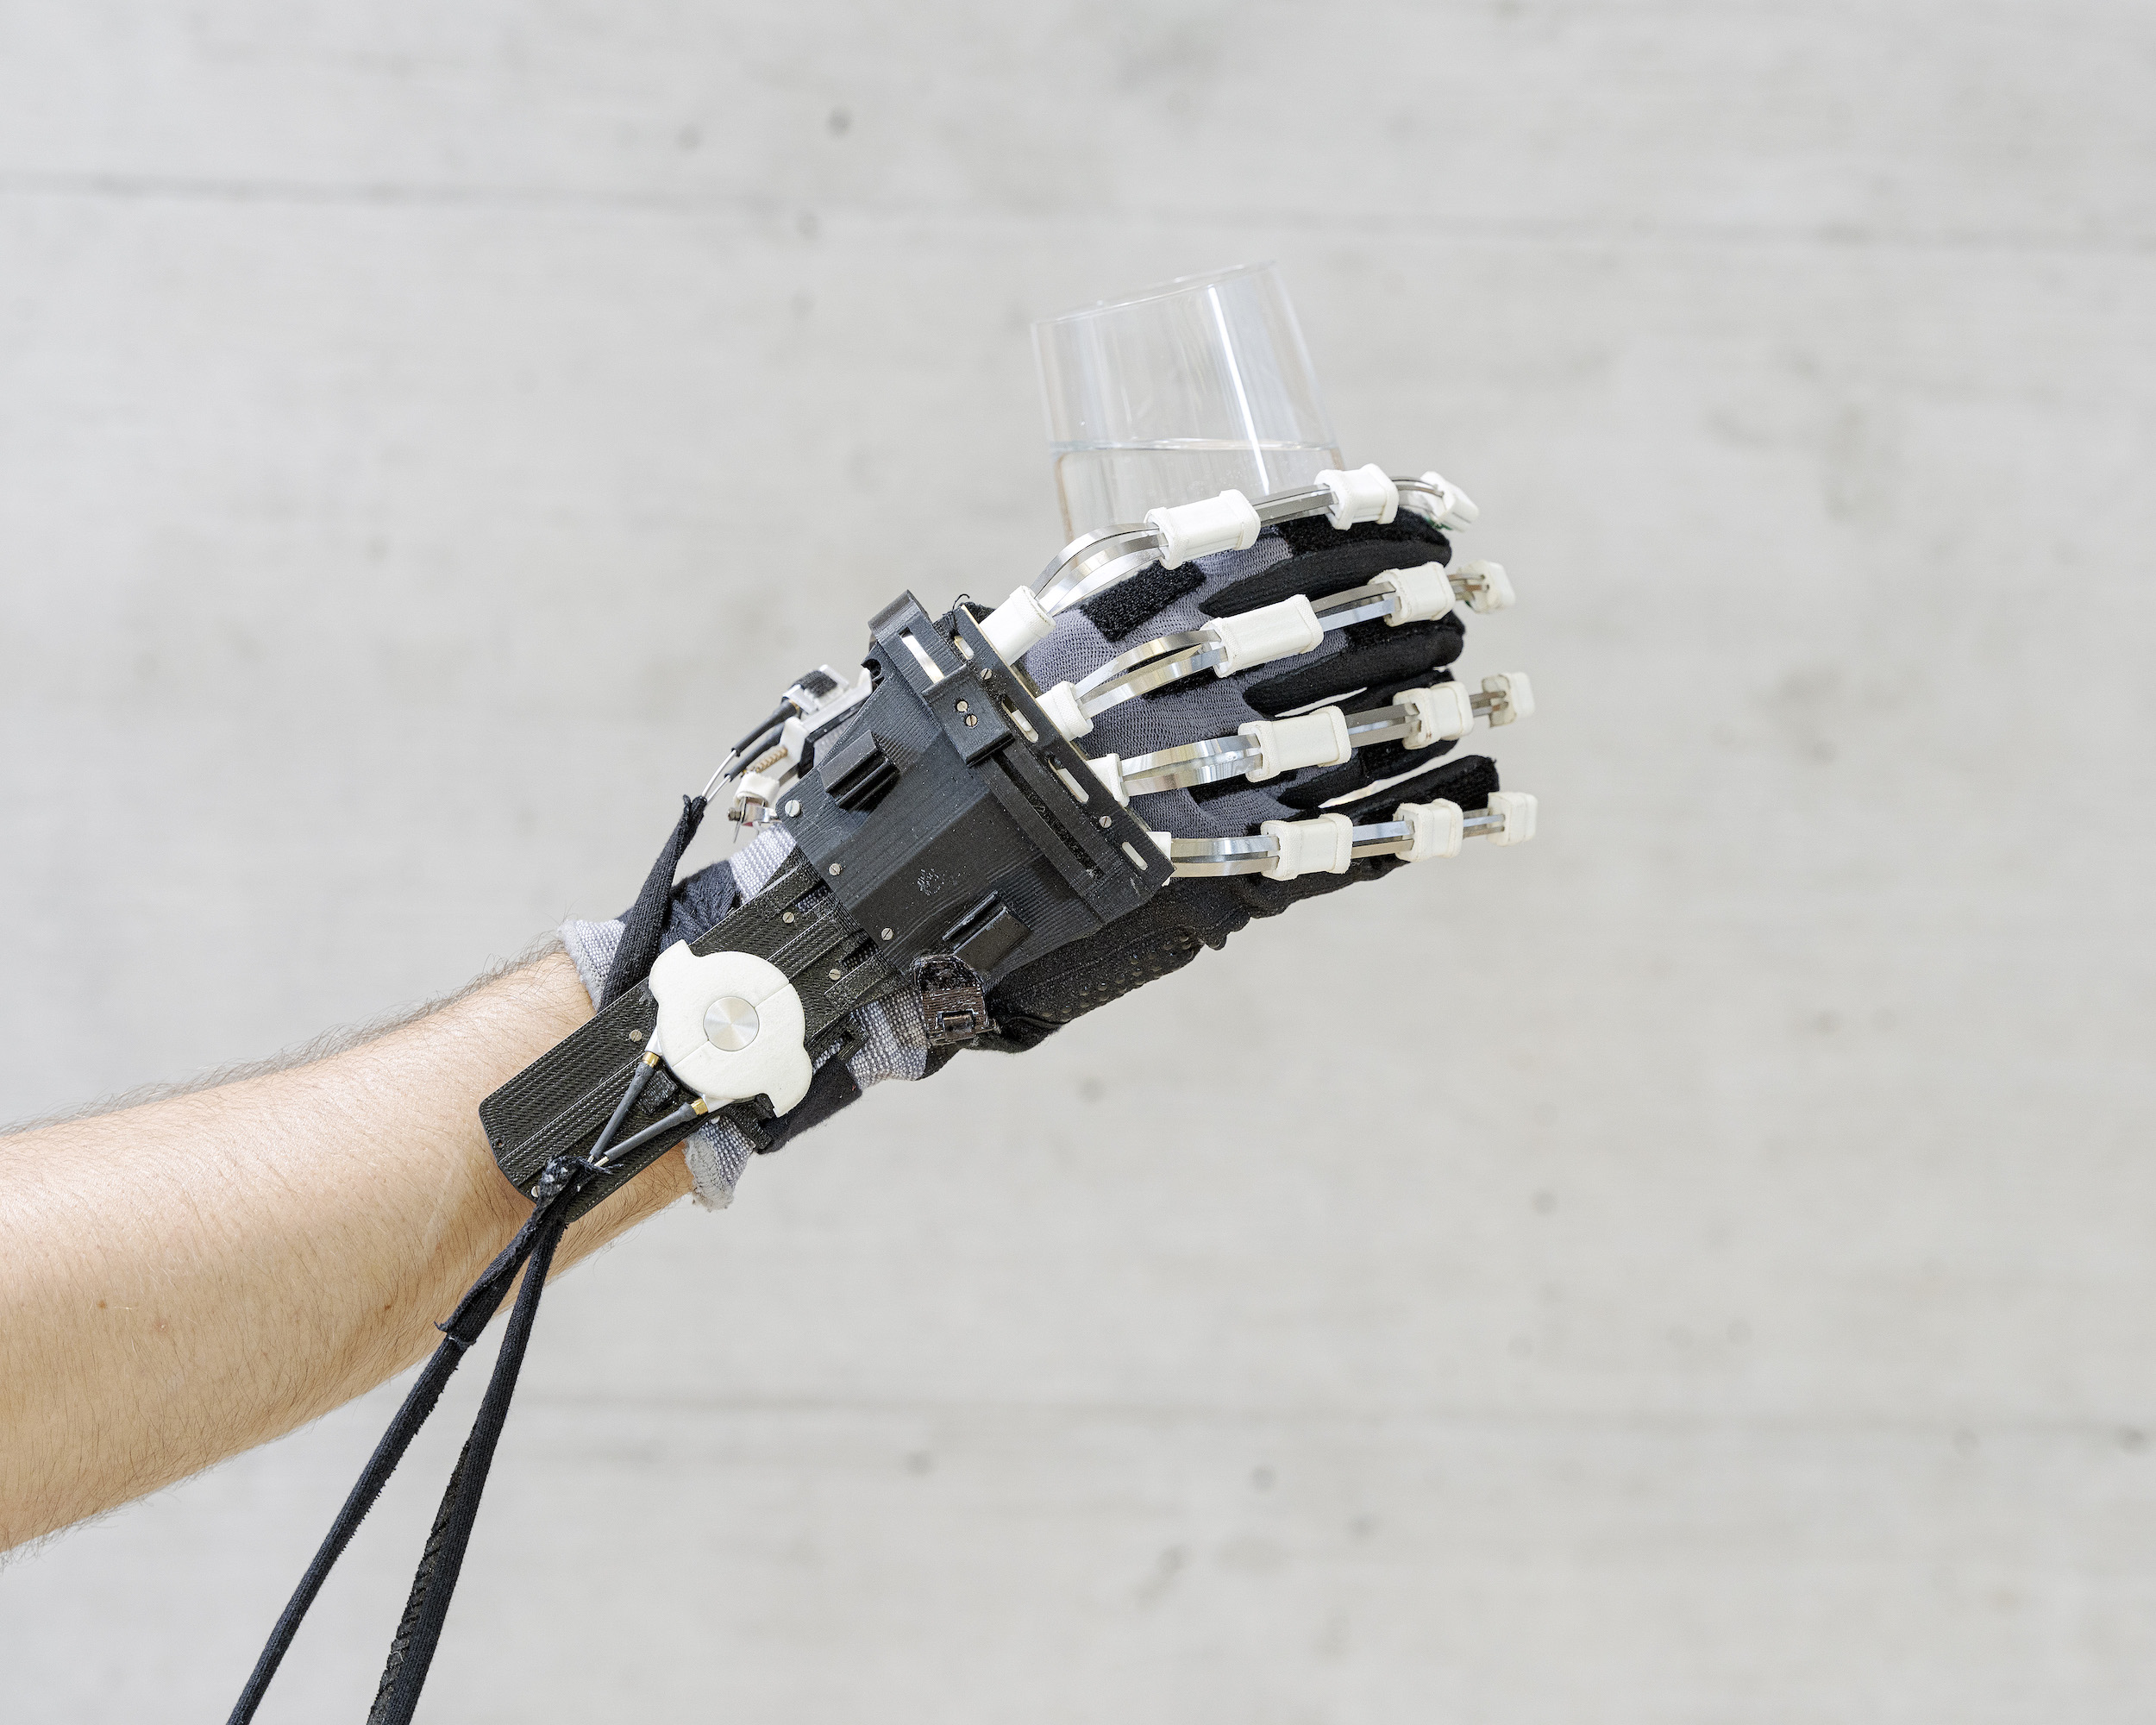 A highly compact and lightweight hand exoskeleton. Stroke, spinal cord injury and muscular atrophy are just few examples of diseases leading to persistent hand impairment. Wearable robotic devices can support the use of the impaired limb in activities of daily living, and provide at-home rehabilitation training. 

Rehabilitation Engineering Laboratory, ETH Zurich.